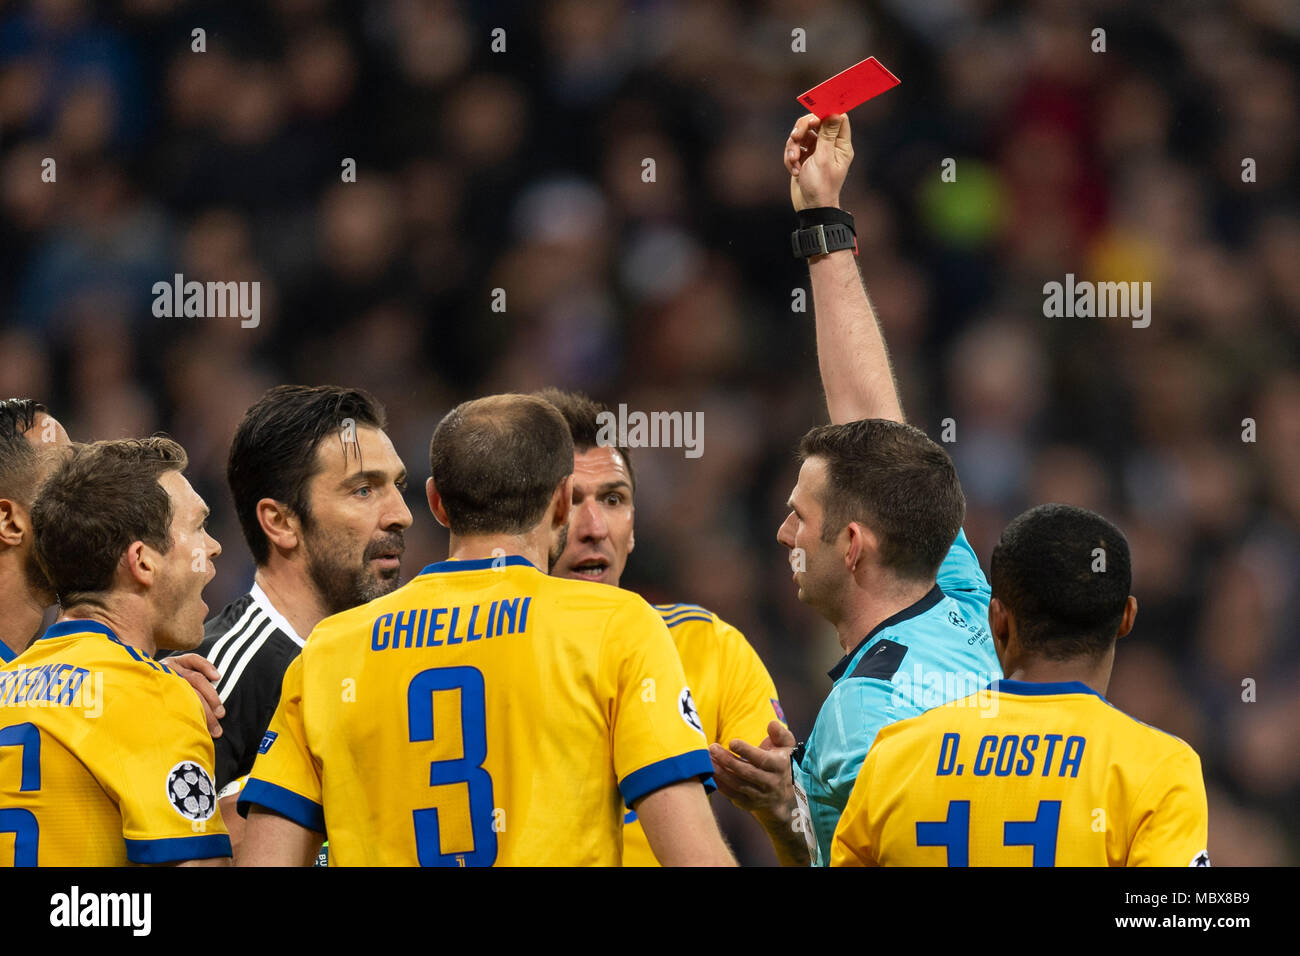 Madrid, Spain. 11th April, 2018. The anger of Gianluigi Buffon of Juventus against the Michael Referee for the assignment of the and card during the Uefa " Champions